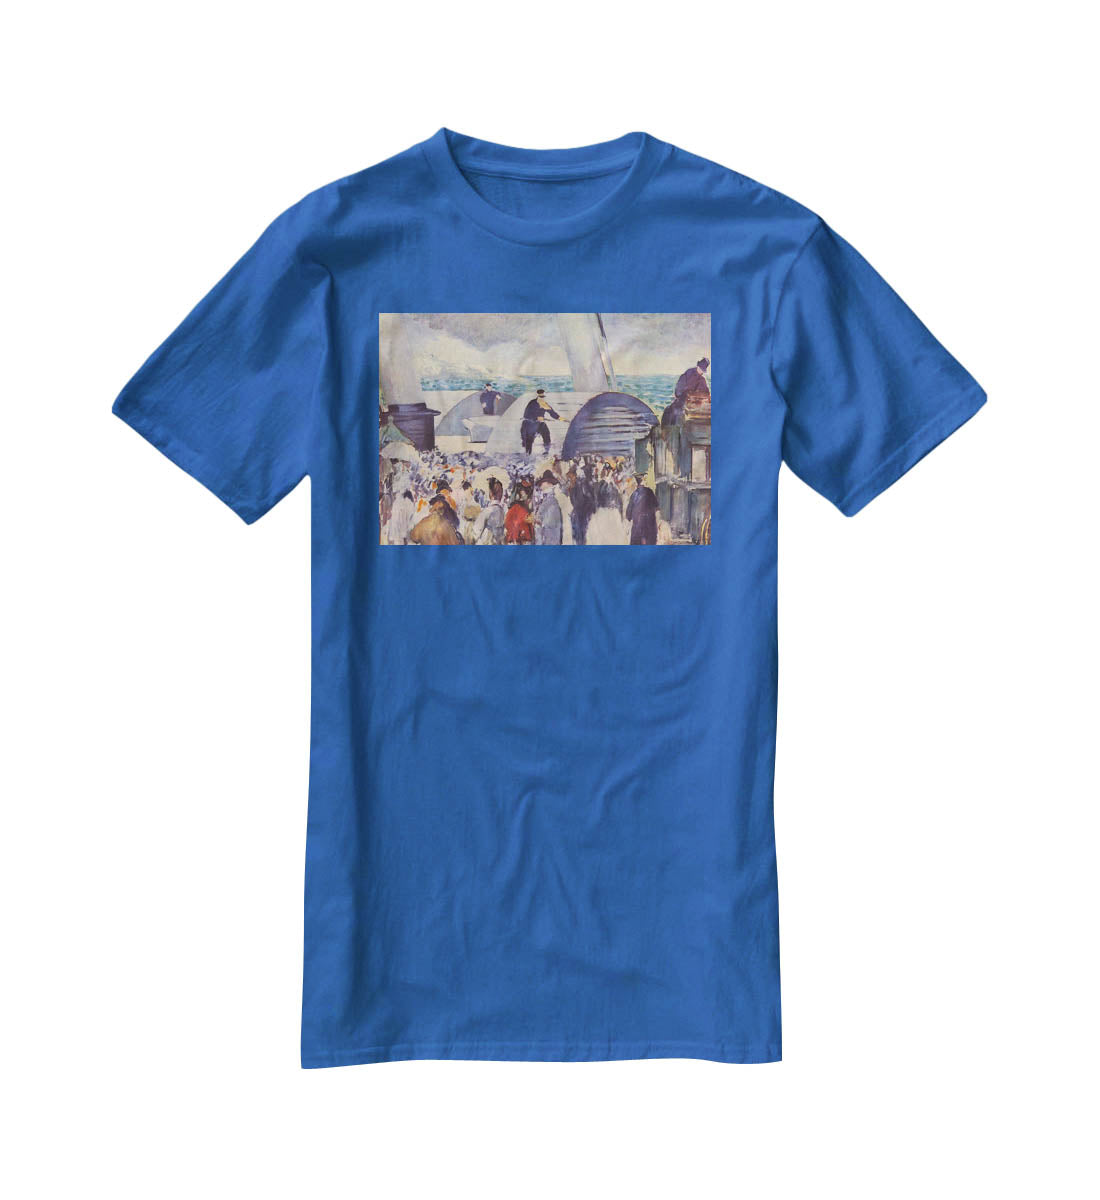 Embarkation of the Folkestone by Manet T-Shirt - Canvas Art Rocks - 2